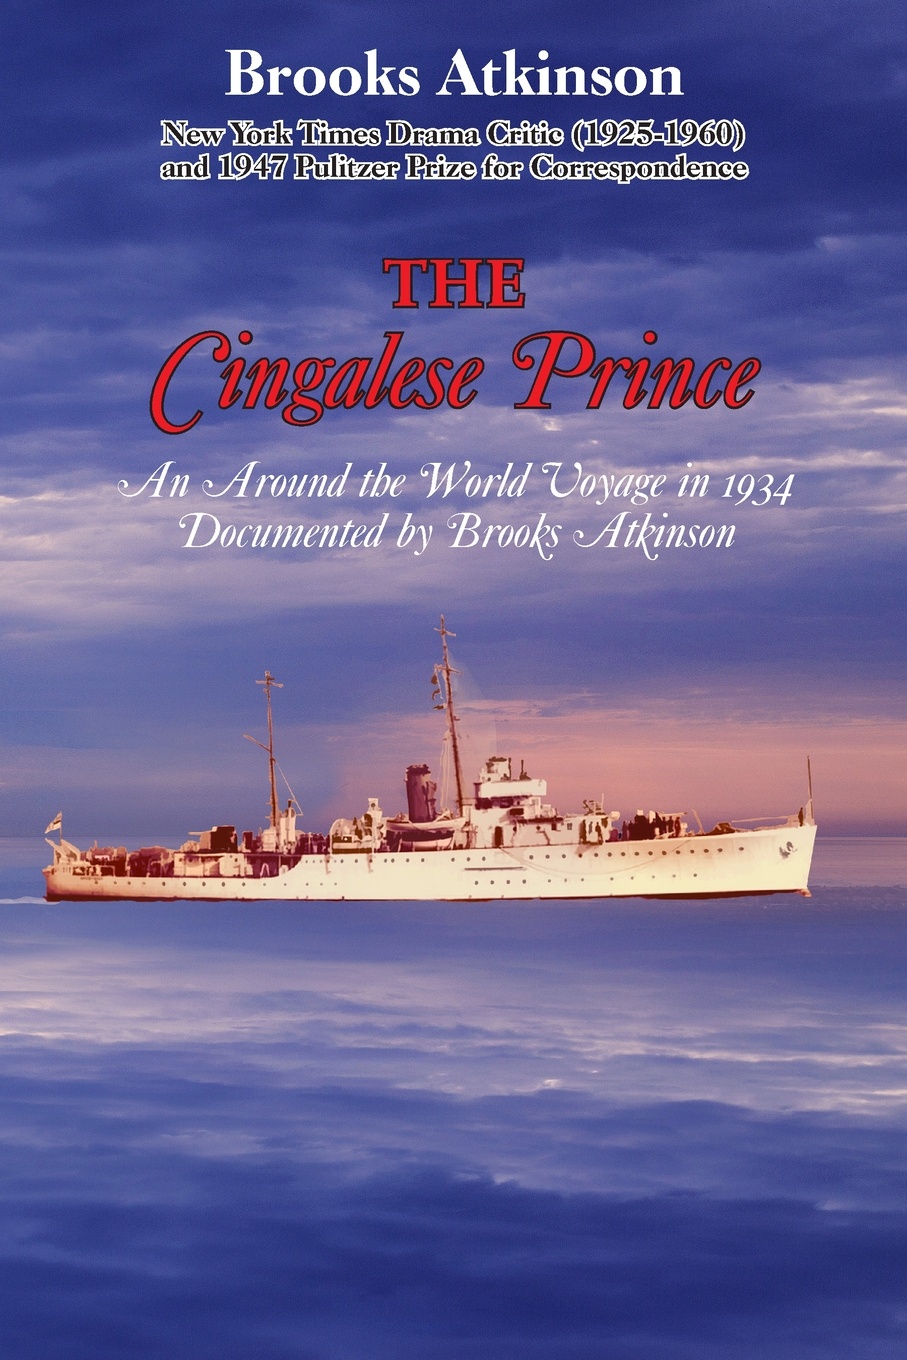 The Cingalese Prince. An Around the World Voyage in 1934 Documented by Brooks Atkinson